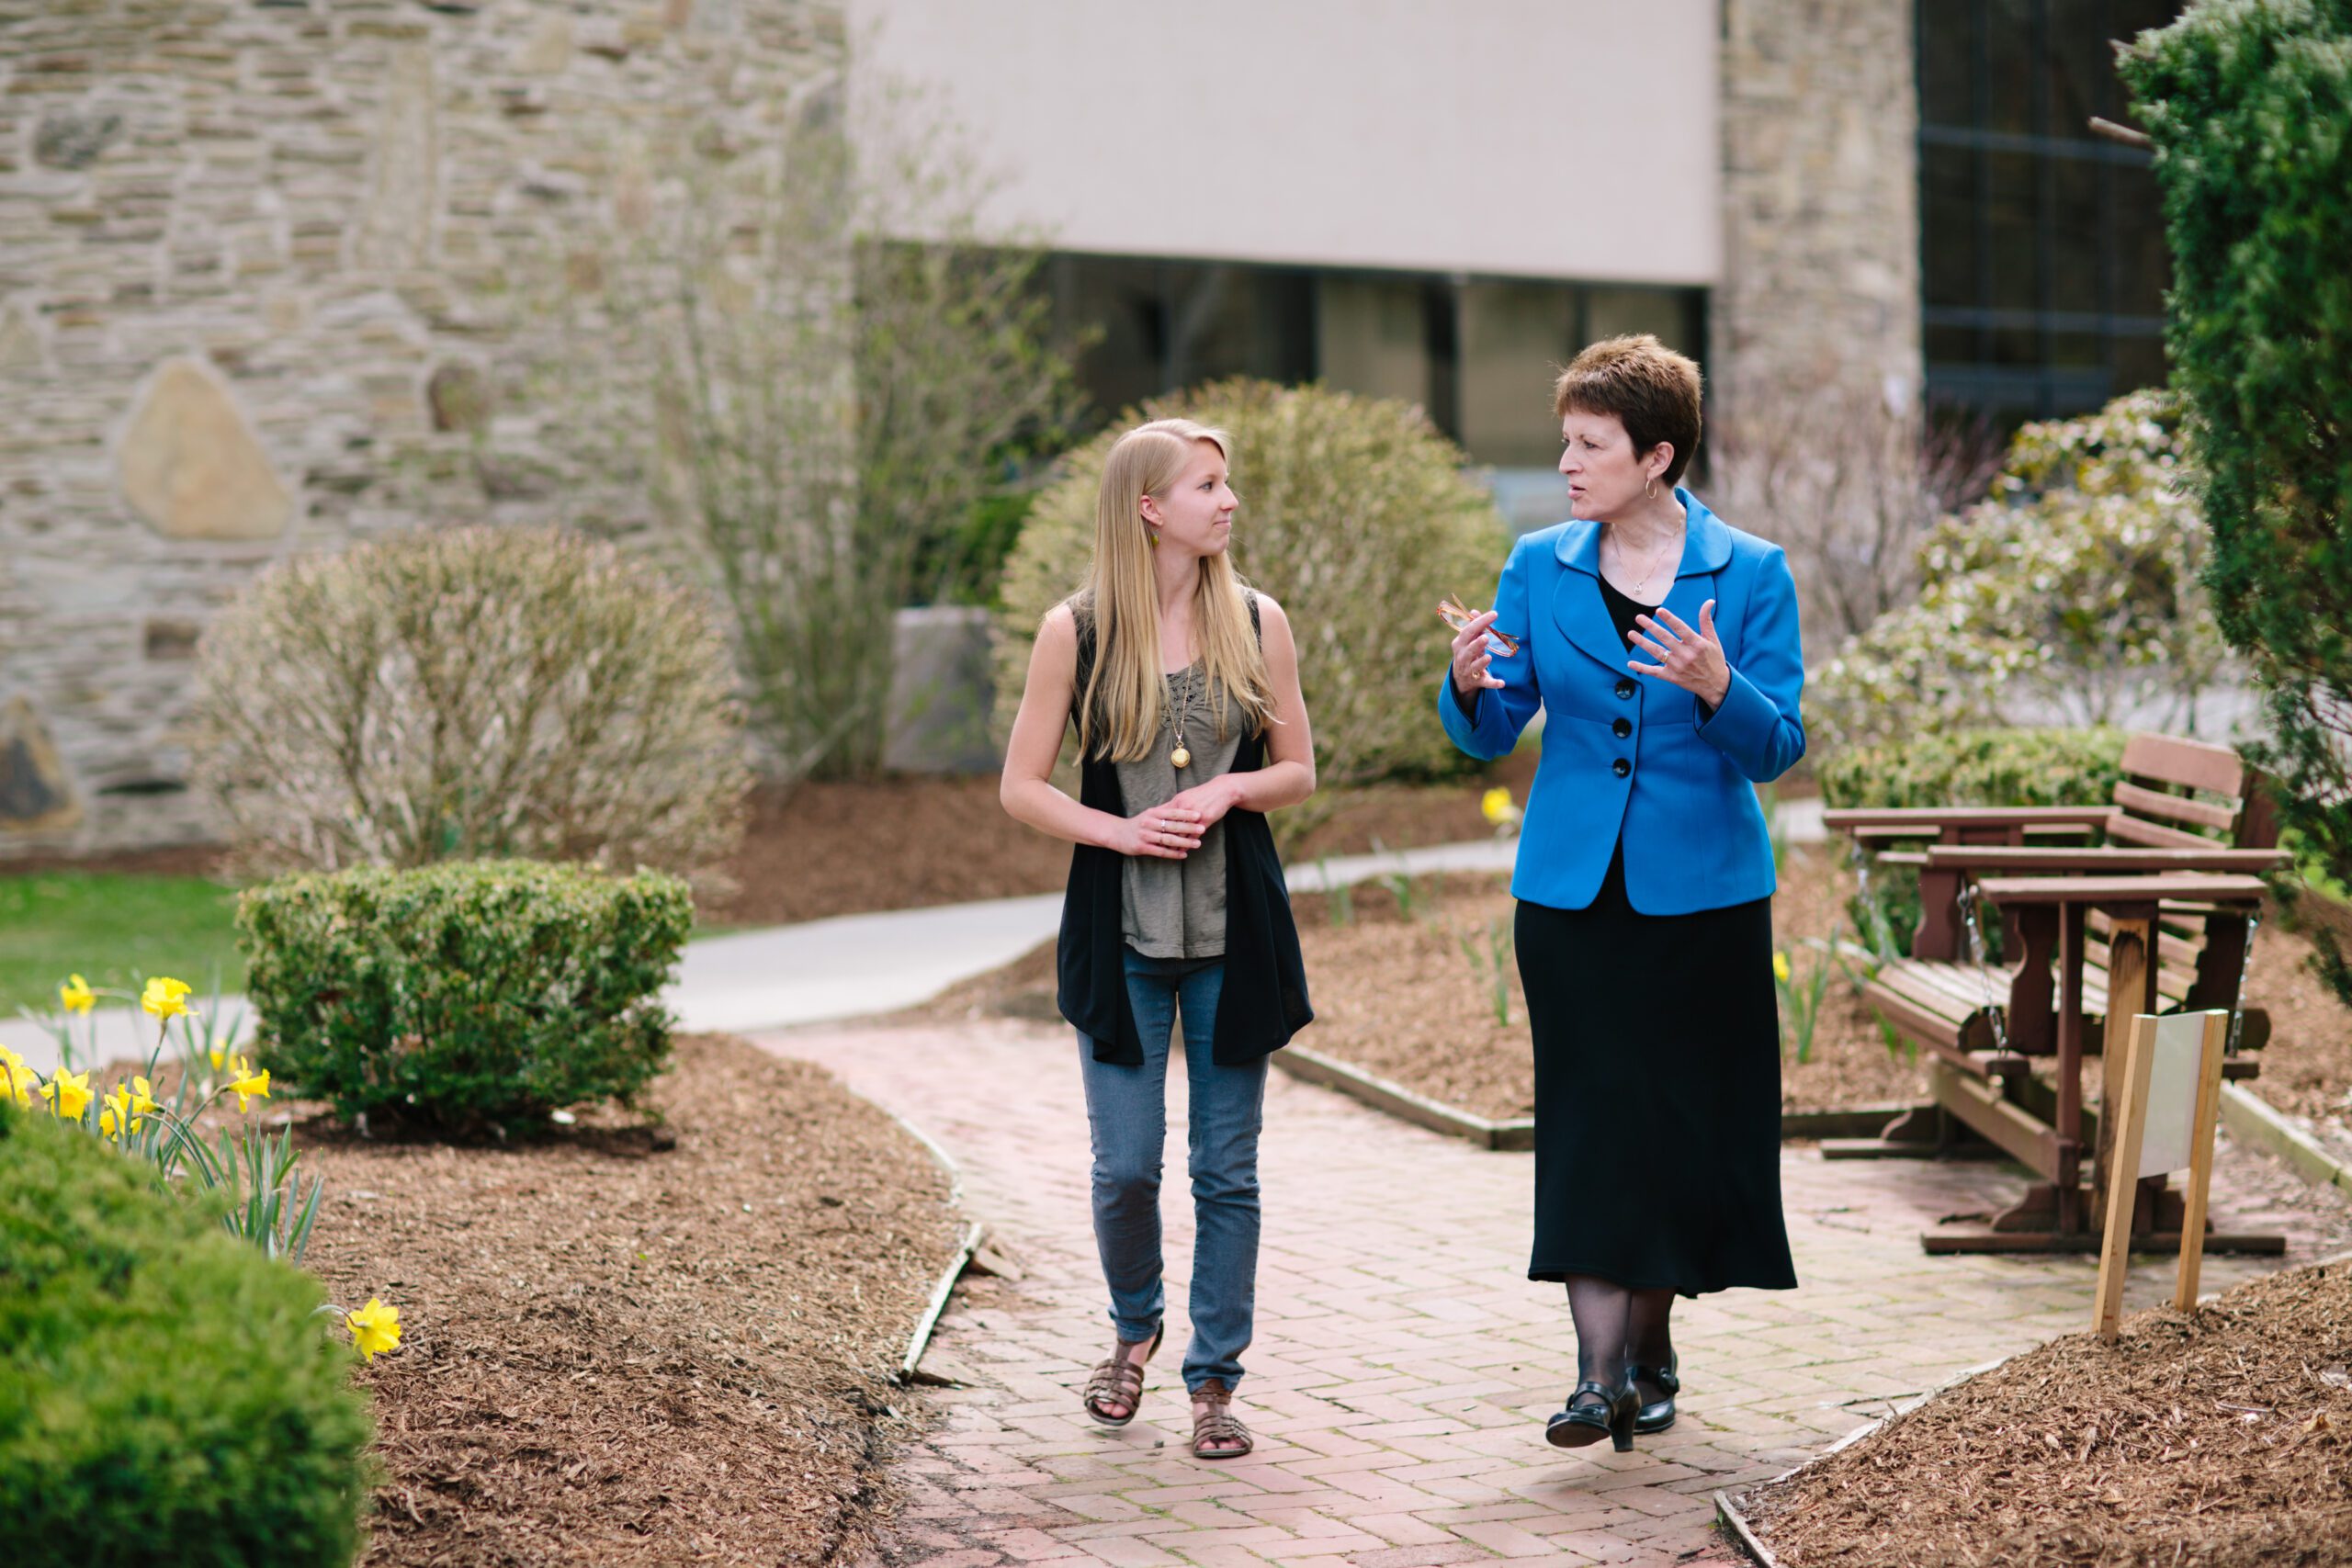 Shirley Mullen walking with student on Houghton's campus in the spring